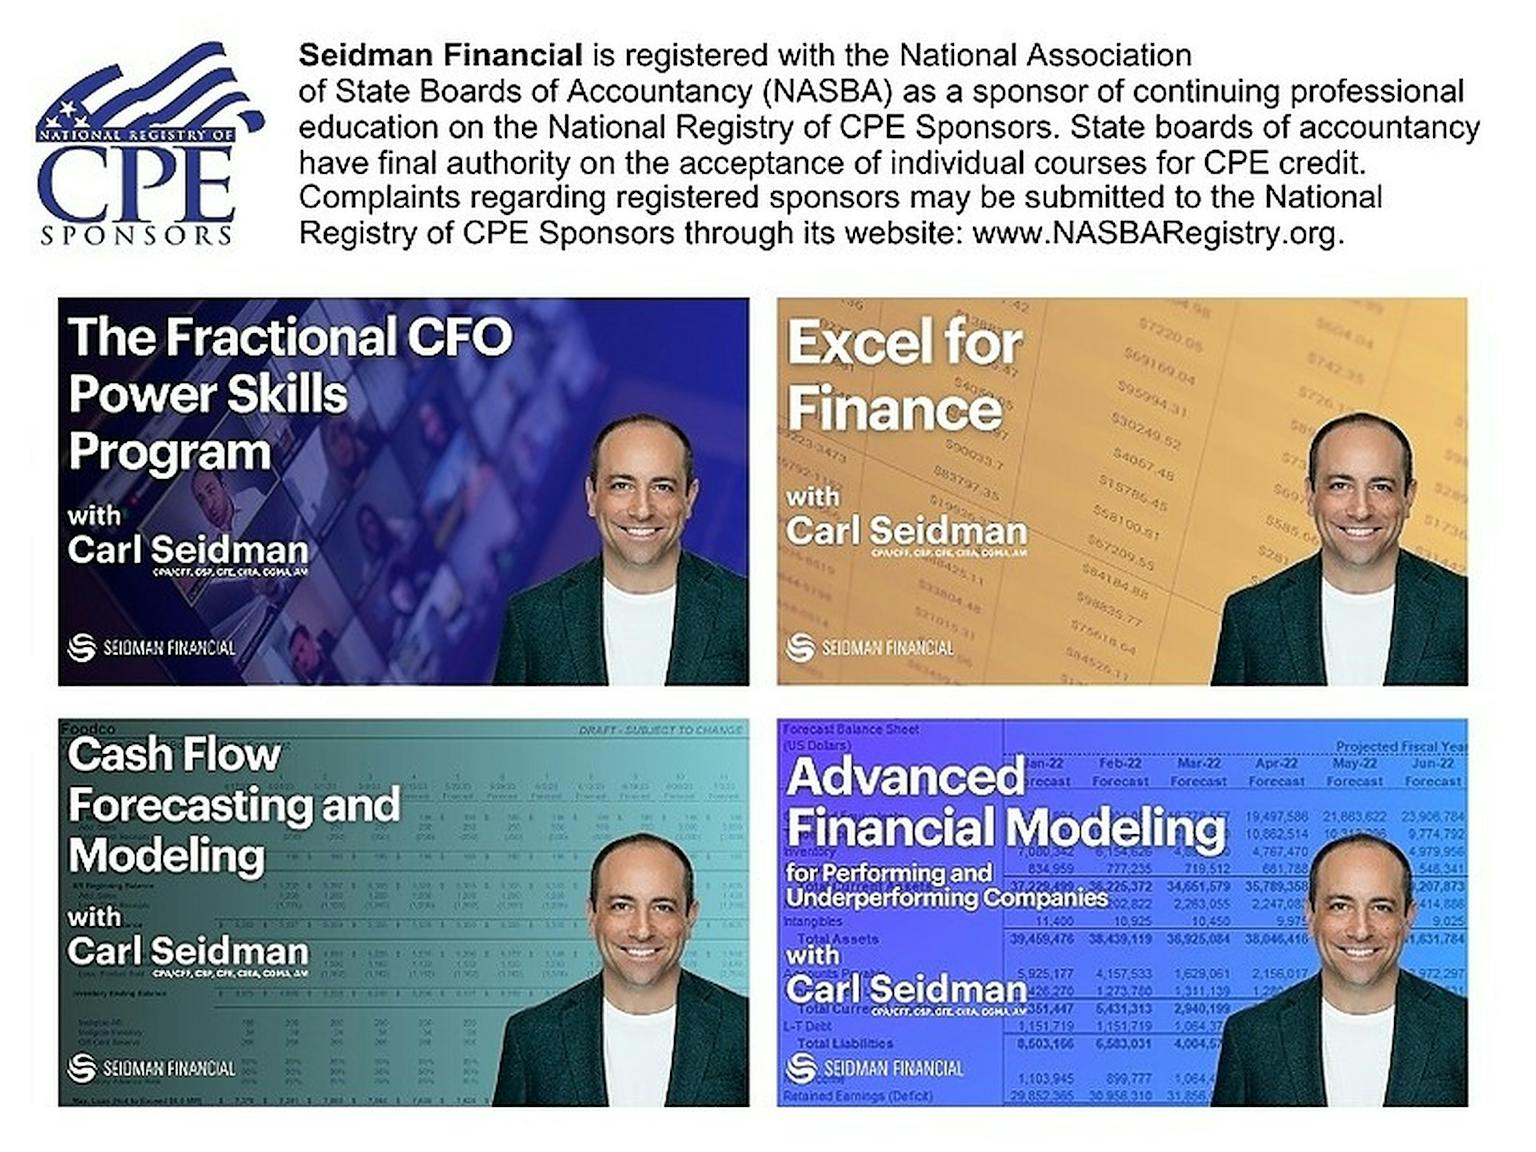 Other programs with Carl Seidman | Visit seidmanfinancial.com to learn more.